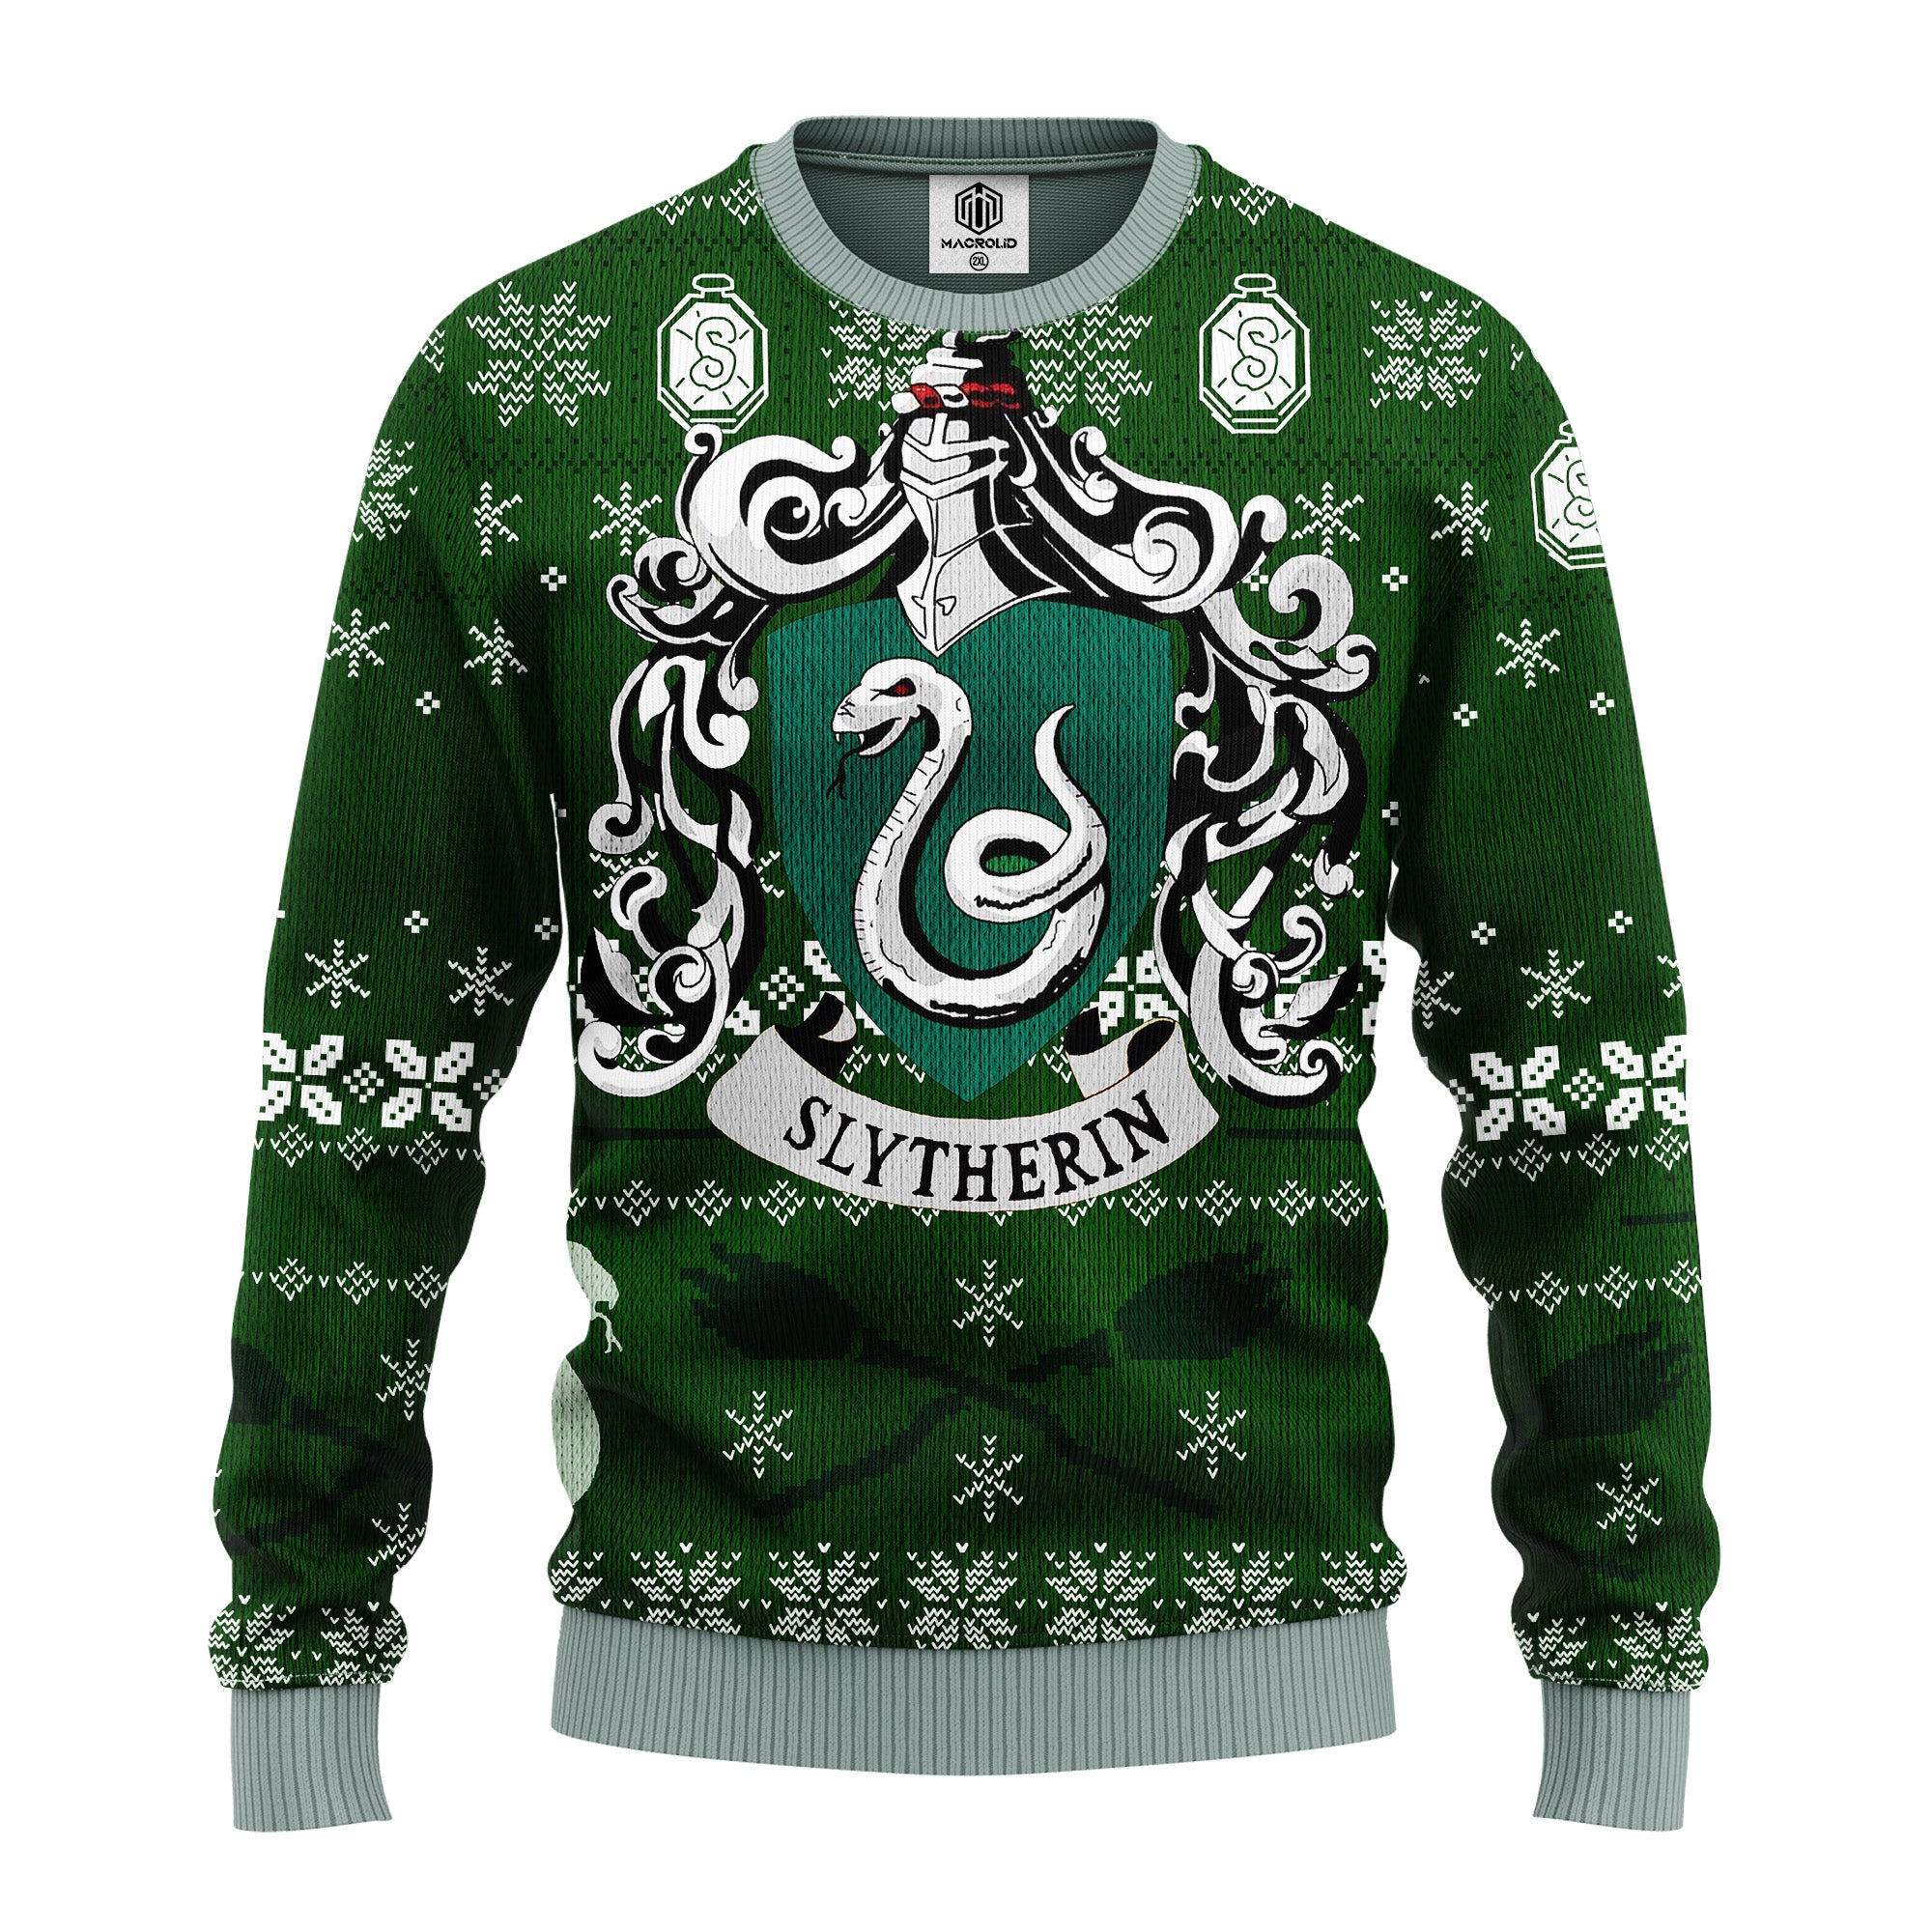 Slytherin Harrypotter Team Ugly Christmas Sweater Amazing Gift Idea Thanksgiving Gift